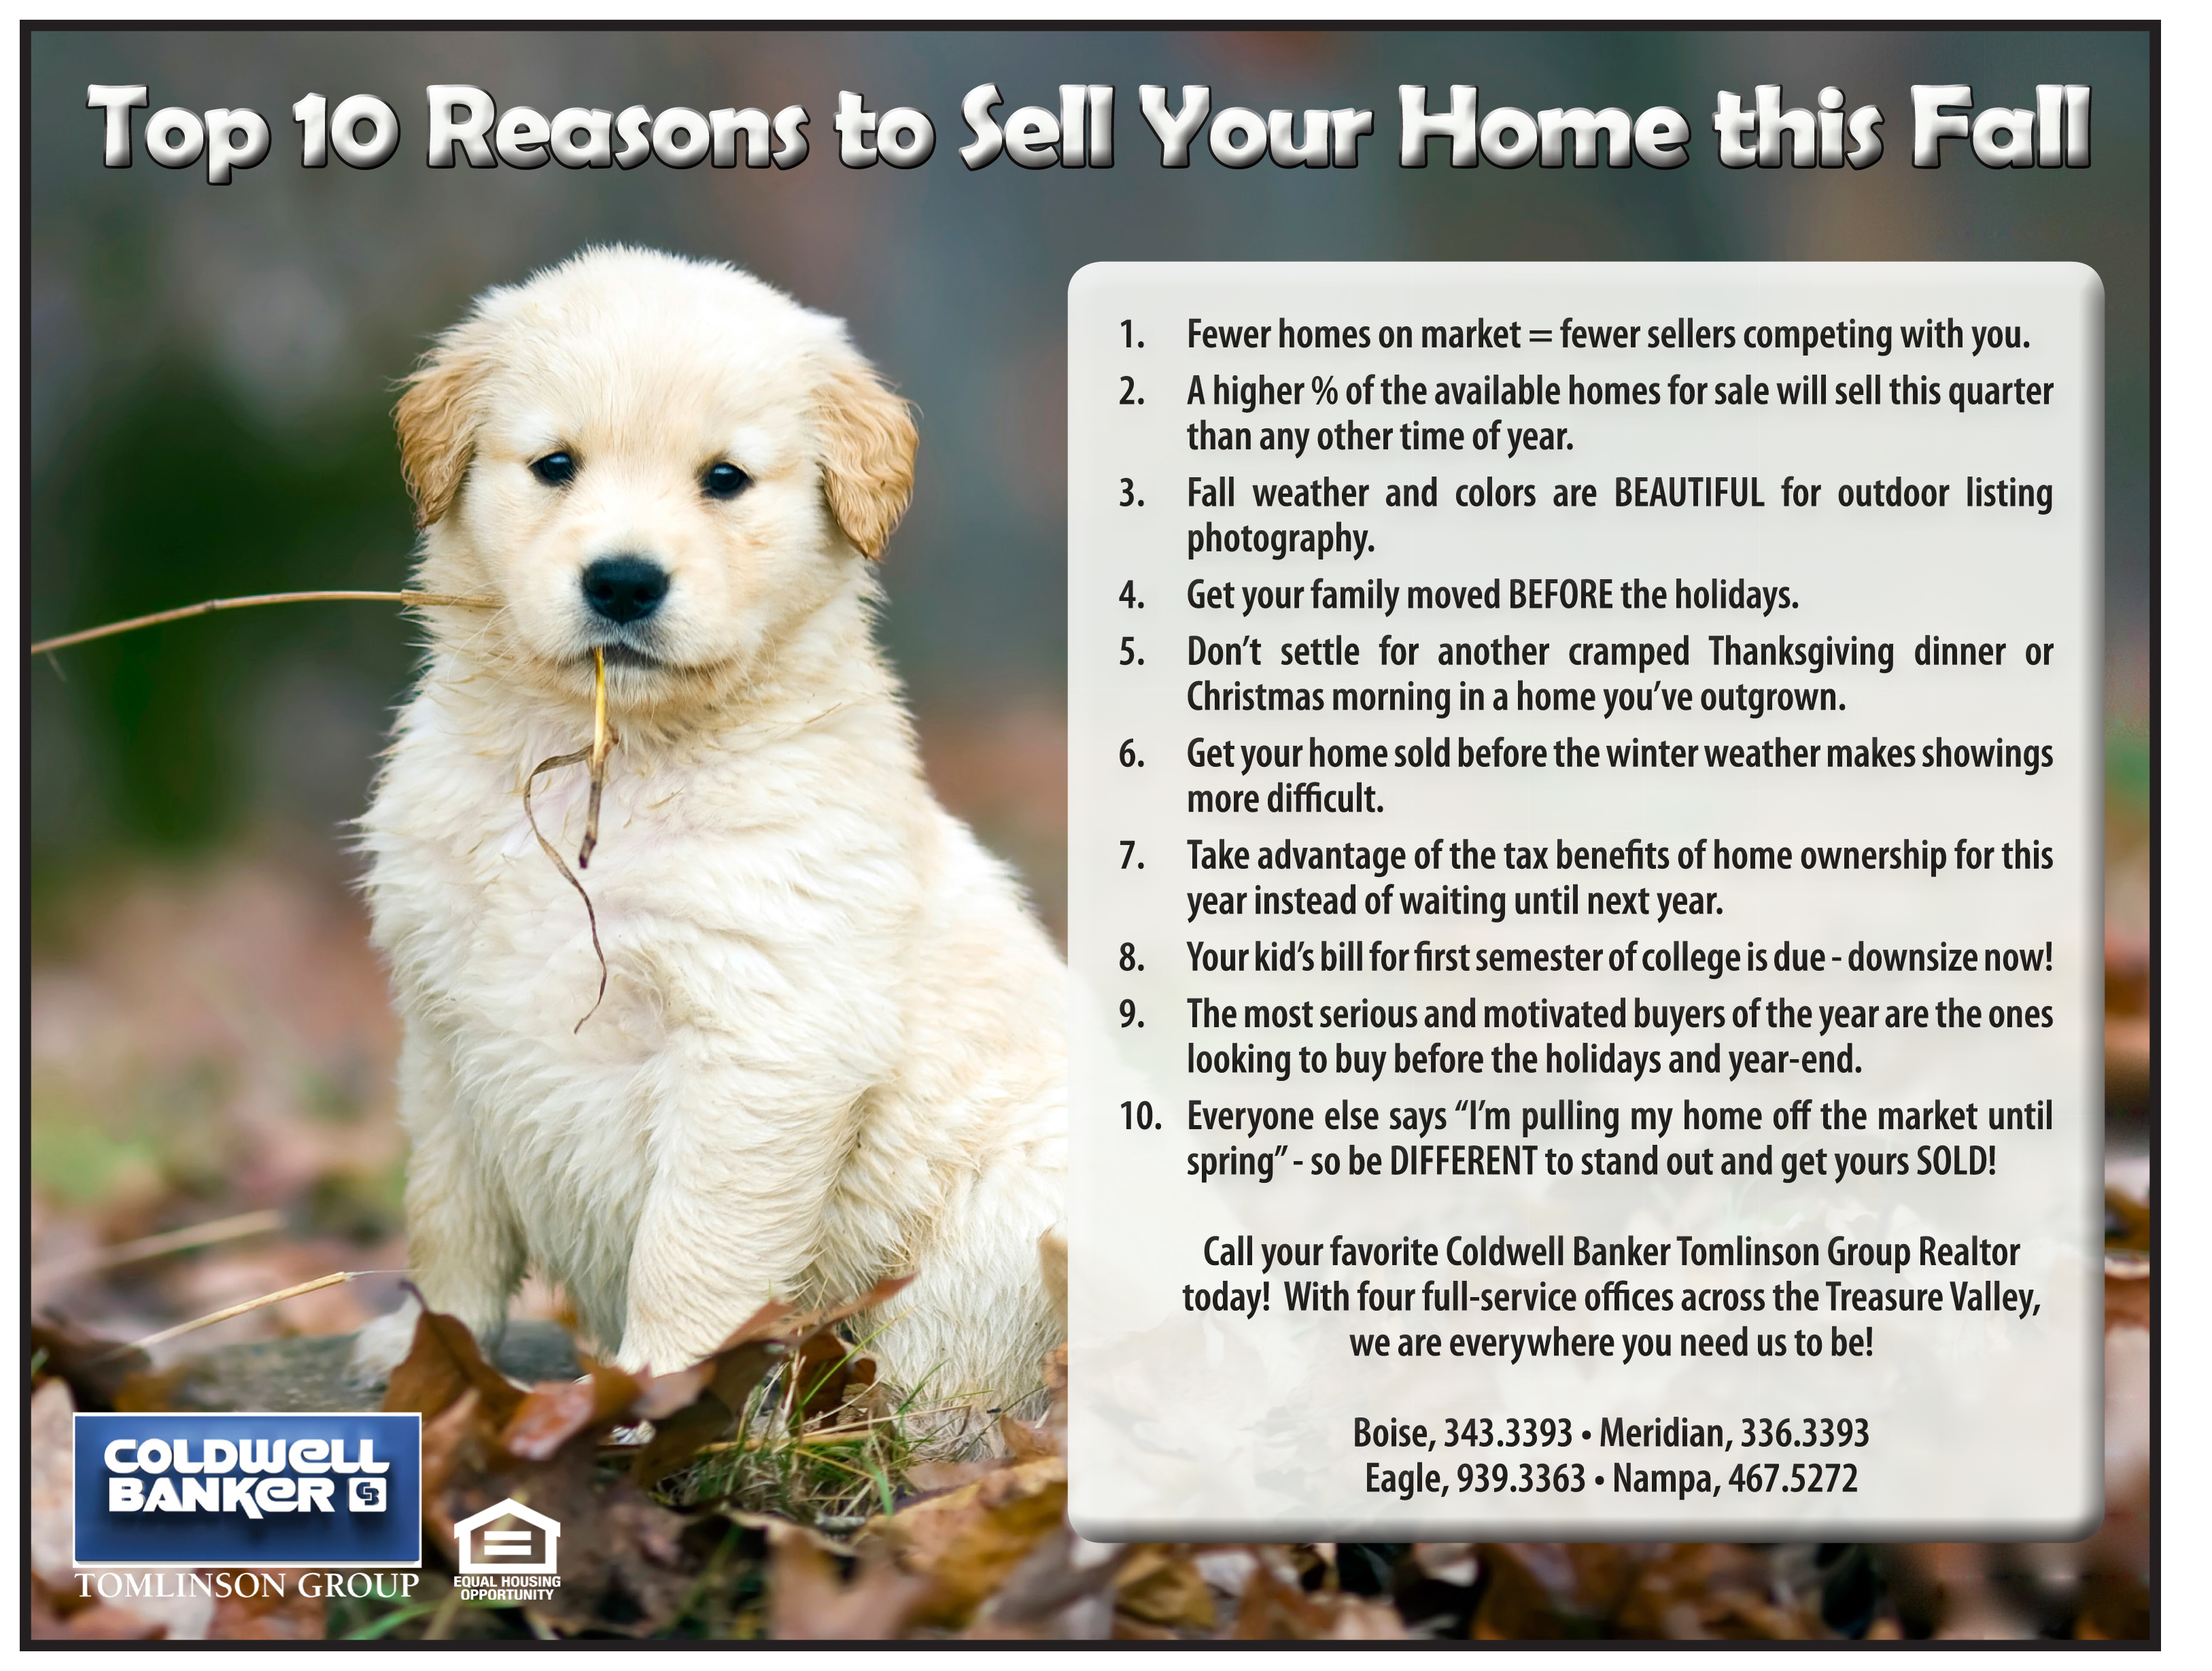 Top 10 Reasons to Sell in Fall - letter size